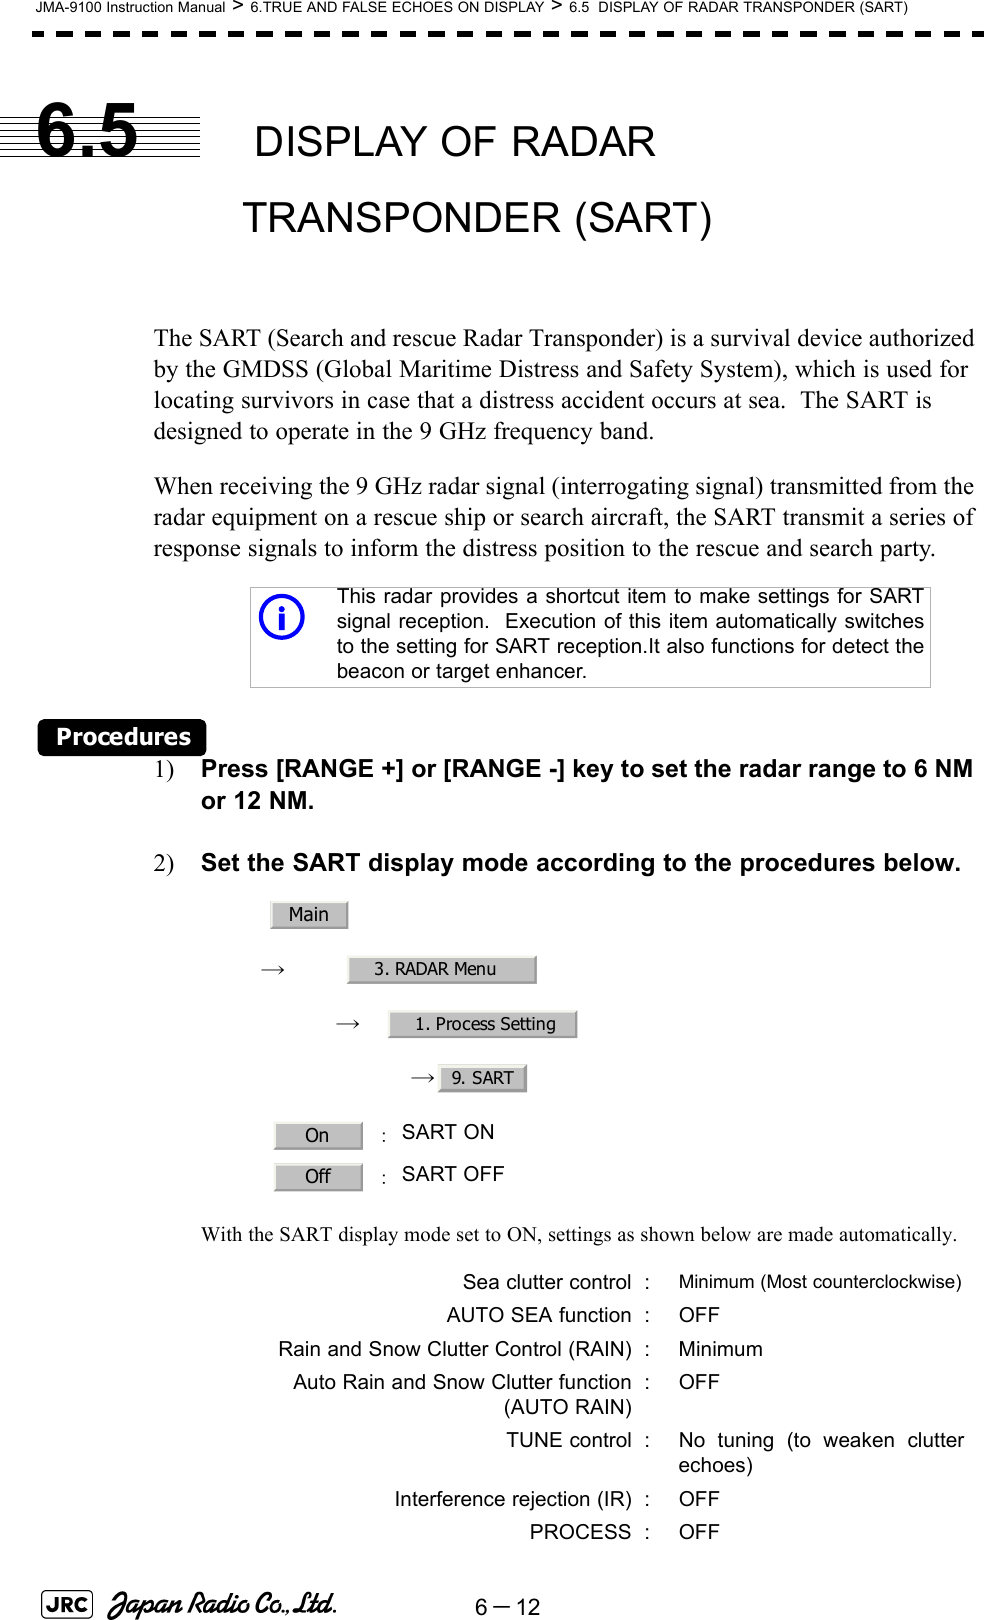 6－12JMA-9100 Instruction Manual &gt; 6.TRUE AND FALSE ECHOES ON DISPLAY &gt; 6.5  DISPLAY OF RADAR TRANSPONDER (SART)6.5  DISPLAY OF RADAR TRANSPONDER (SART)The SART (Search and rescue Radar Transponder) is a survival device authorized by the GMDSS (Global Maritime Distress and Safety System), which is used for locating survivors in case that a distress accident occurs at sea.  The SART is designed to operate in the 9 GHz frequency band.When receiving the 9 GHz radar signal (interrogating signal) transmitted from the radar equipment on a rescue ship or search aircraft, the SART transmit a series of response signals to inform the distress position to the rescue and search party.Procedures1) Press [RANGE +] or [RANGE -] key to set the radar range to 6 NM or 12 NM.2) Set the SART display mode according to the procedures below.　　 →　　　 →　→ With the SART display mode set to ON, settings as shown below are made automatically.This radar provides a shortcut item to make settings for SARTsignal reception.  Execution of this item automatically switchesto the setting for SART reception.It also functions for detect thebeacon or target enhancer. ：SART ON  ：SART OFFSea clutter control : Minimum (Most counterclockwise)AUTO SEA function : OFFRain and Snow Clutter Control (RAIN) : MinimumAuto Rain and Snow Clutter function(AUTO RAIN):OFFTUNE control : No tuning (to weaken clutterechoes)Interference rejection (IR) : OFFPROCESS : OFFiMain3. RADAR Menu1. Process Setting9. SARTOnOff